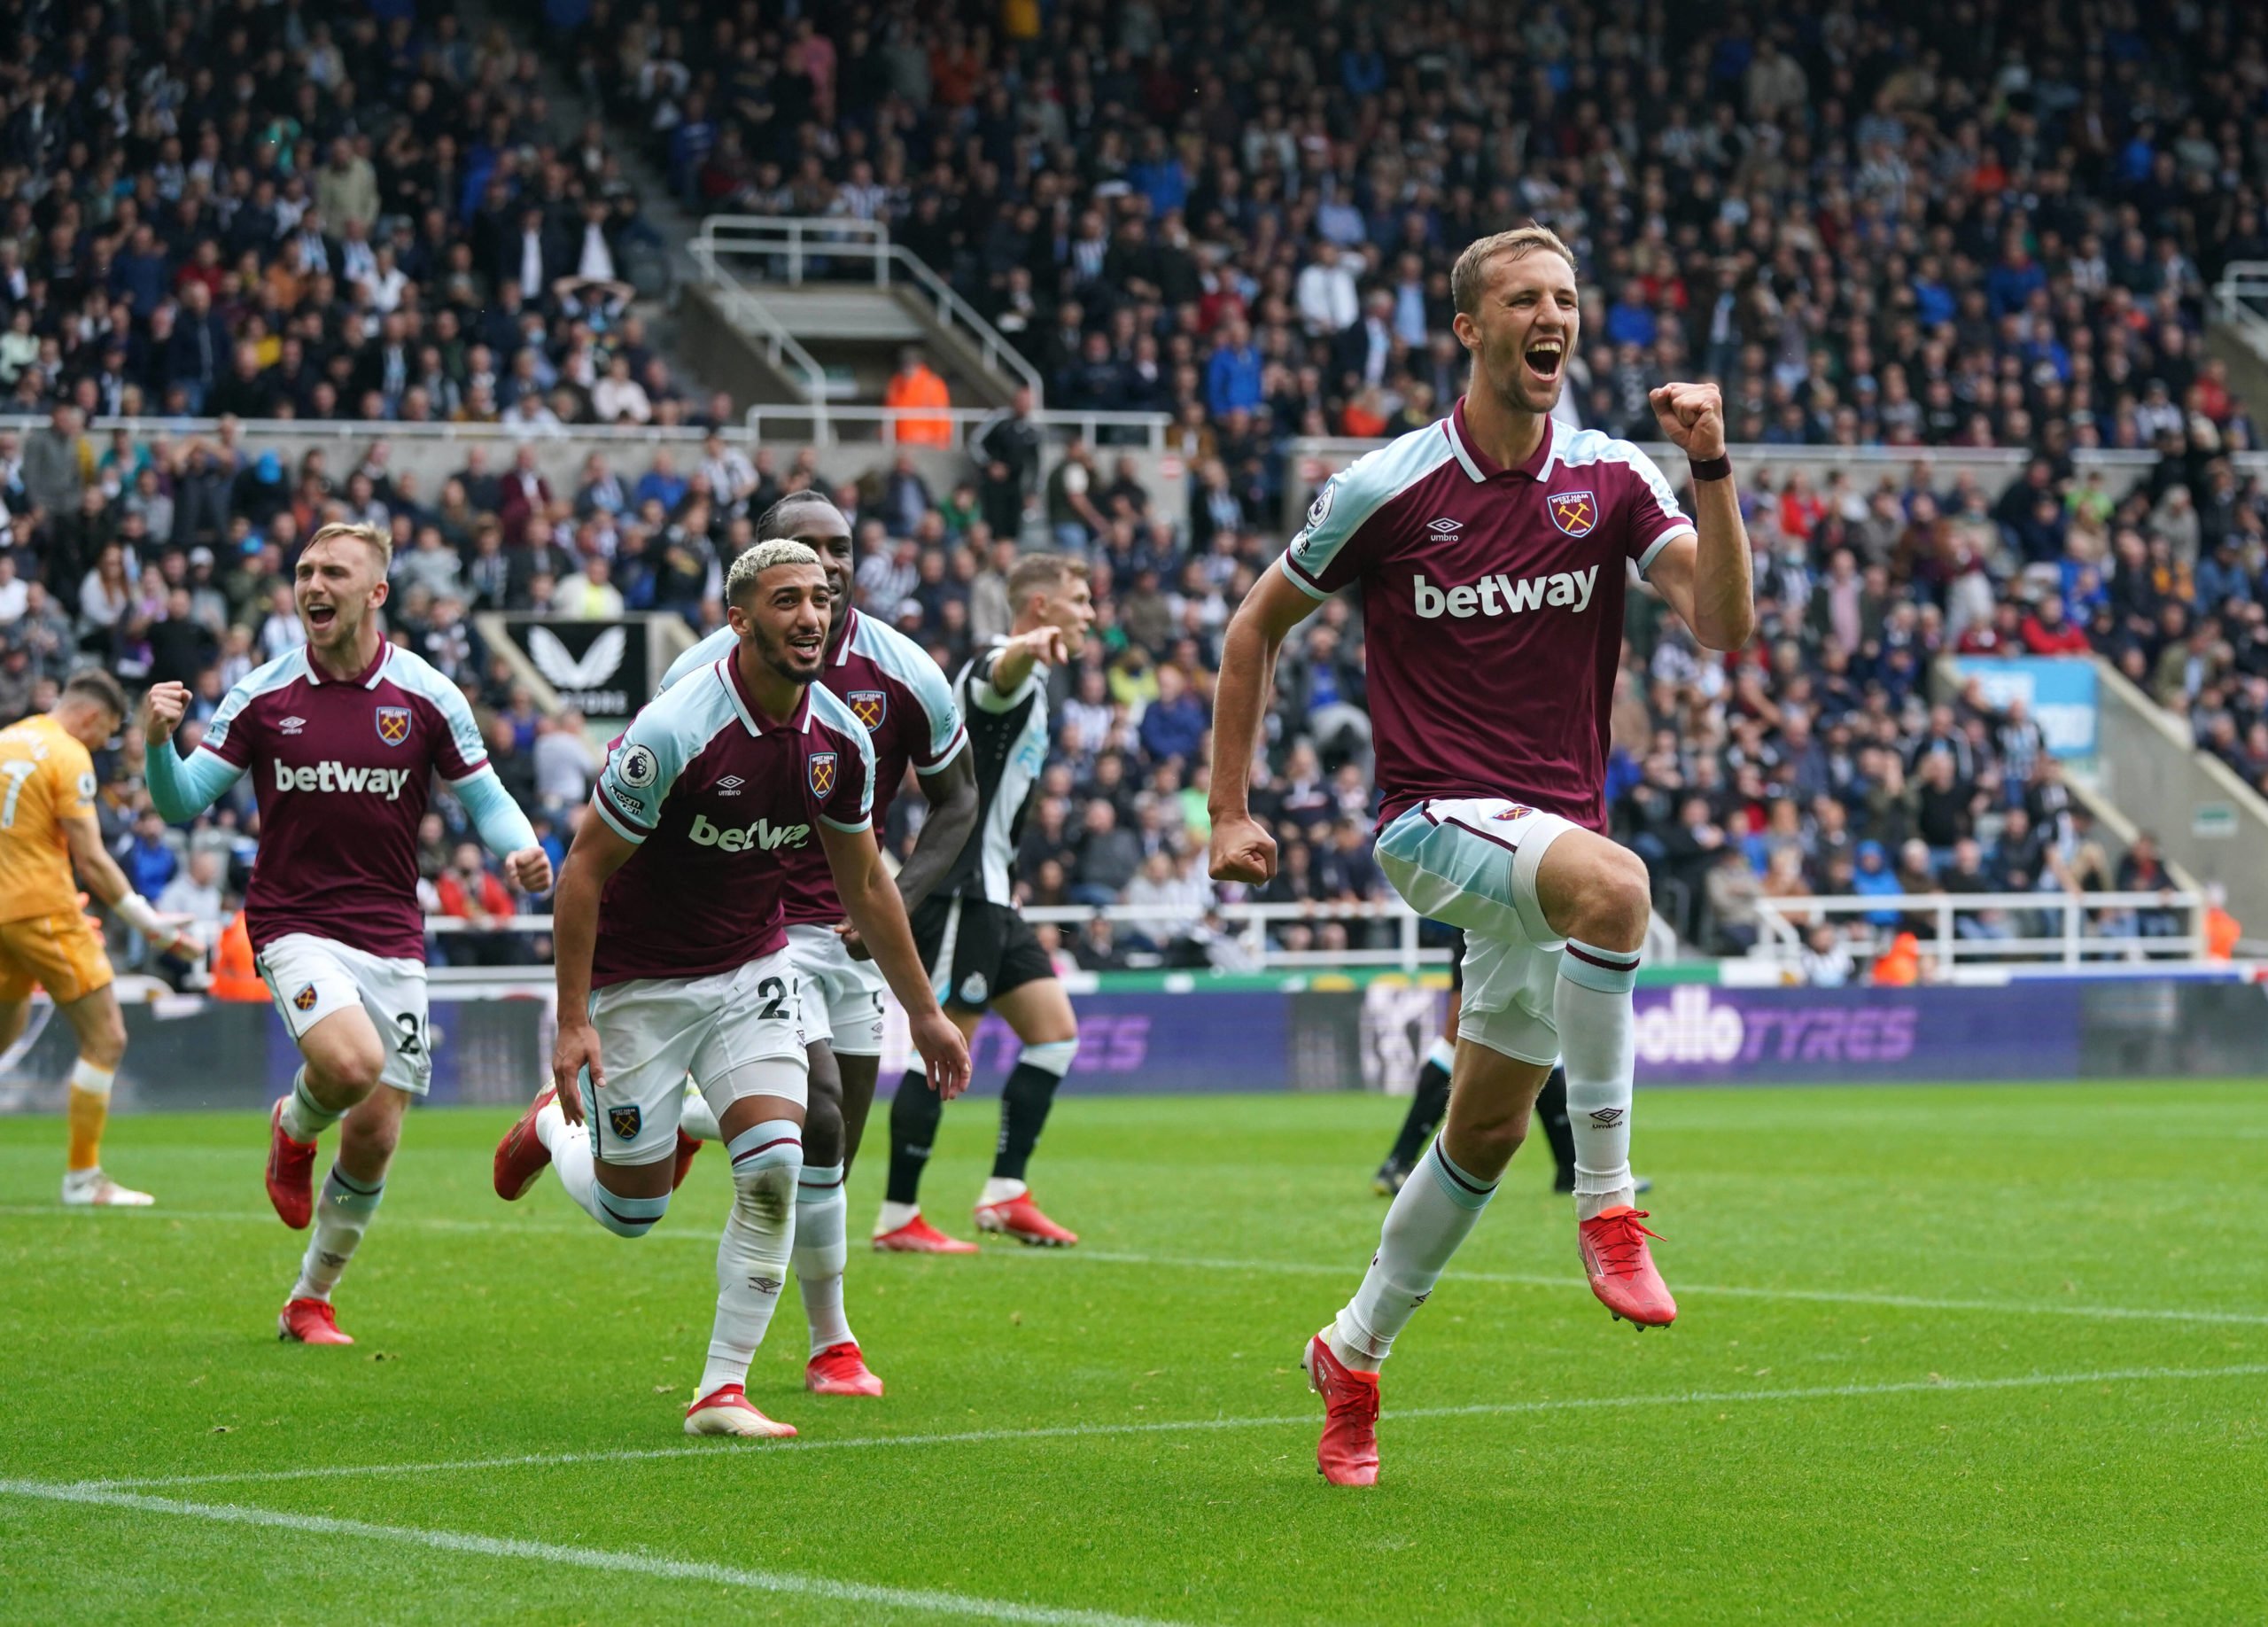 West Ham United Predicted Lineup Vs Southampton (West Ham players are celebrating in the picture)